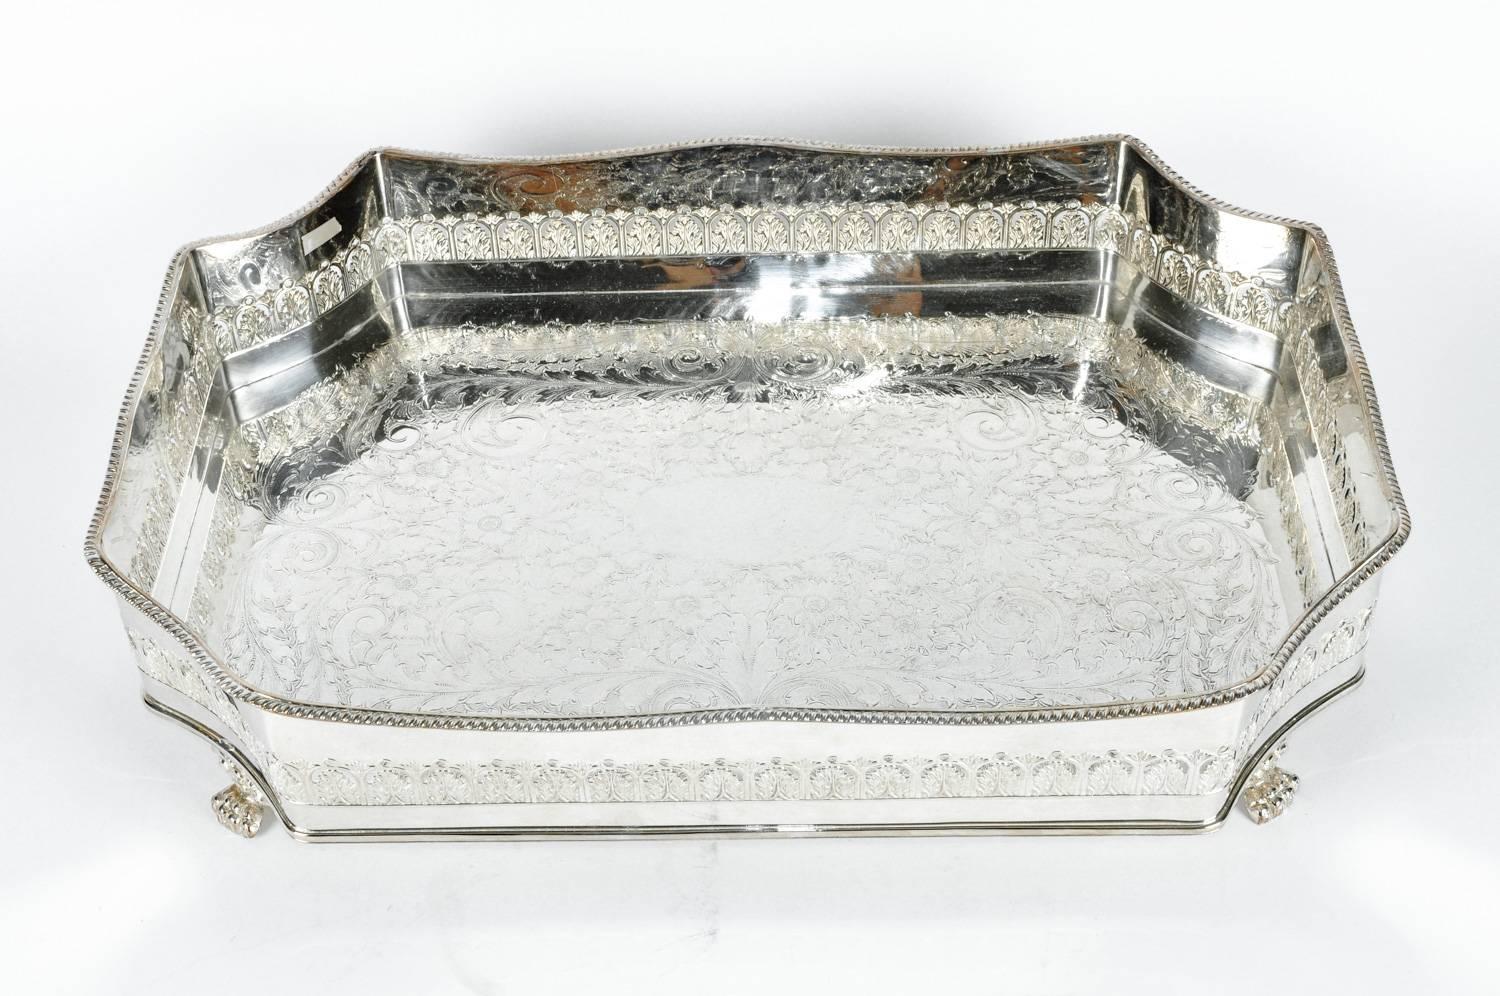 Large eight-sided English footed silver plate barware or serving tray with intricate interior design details work. In excellent condition, maker's mark undersigned. The tray measure 20 inches long x 14 inches width x 3.5 inches high.